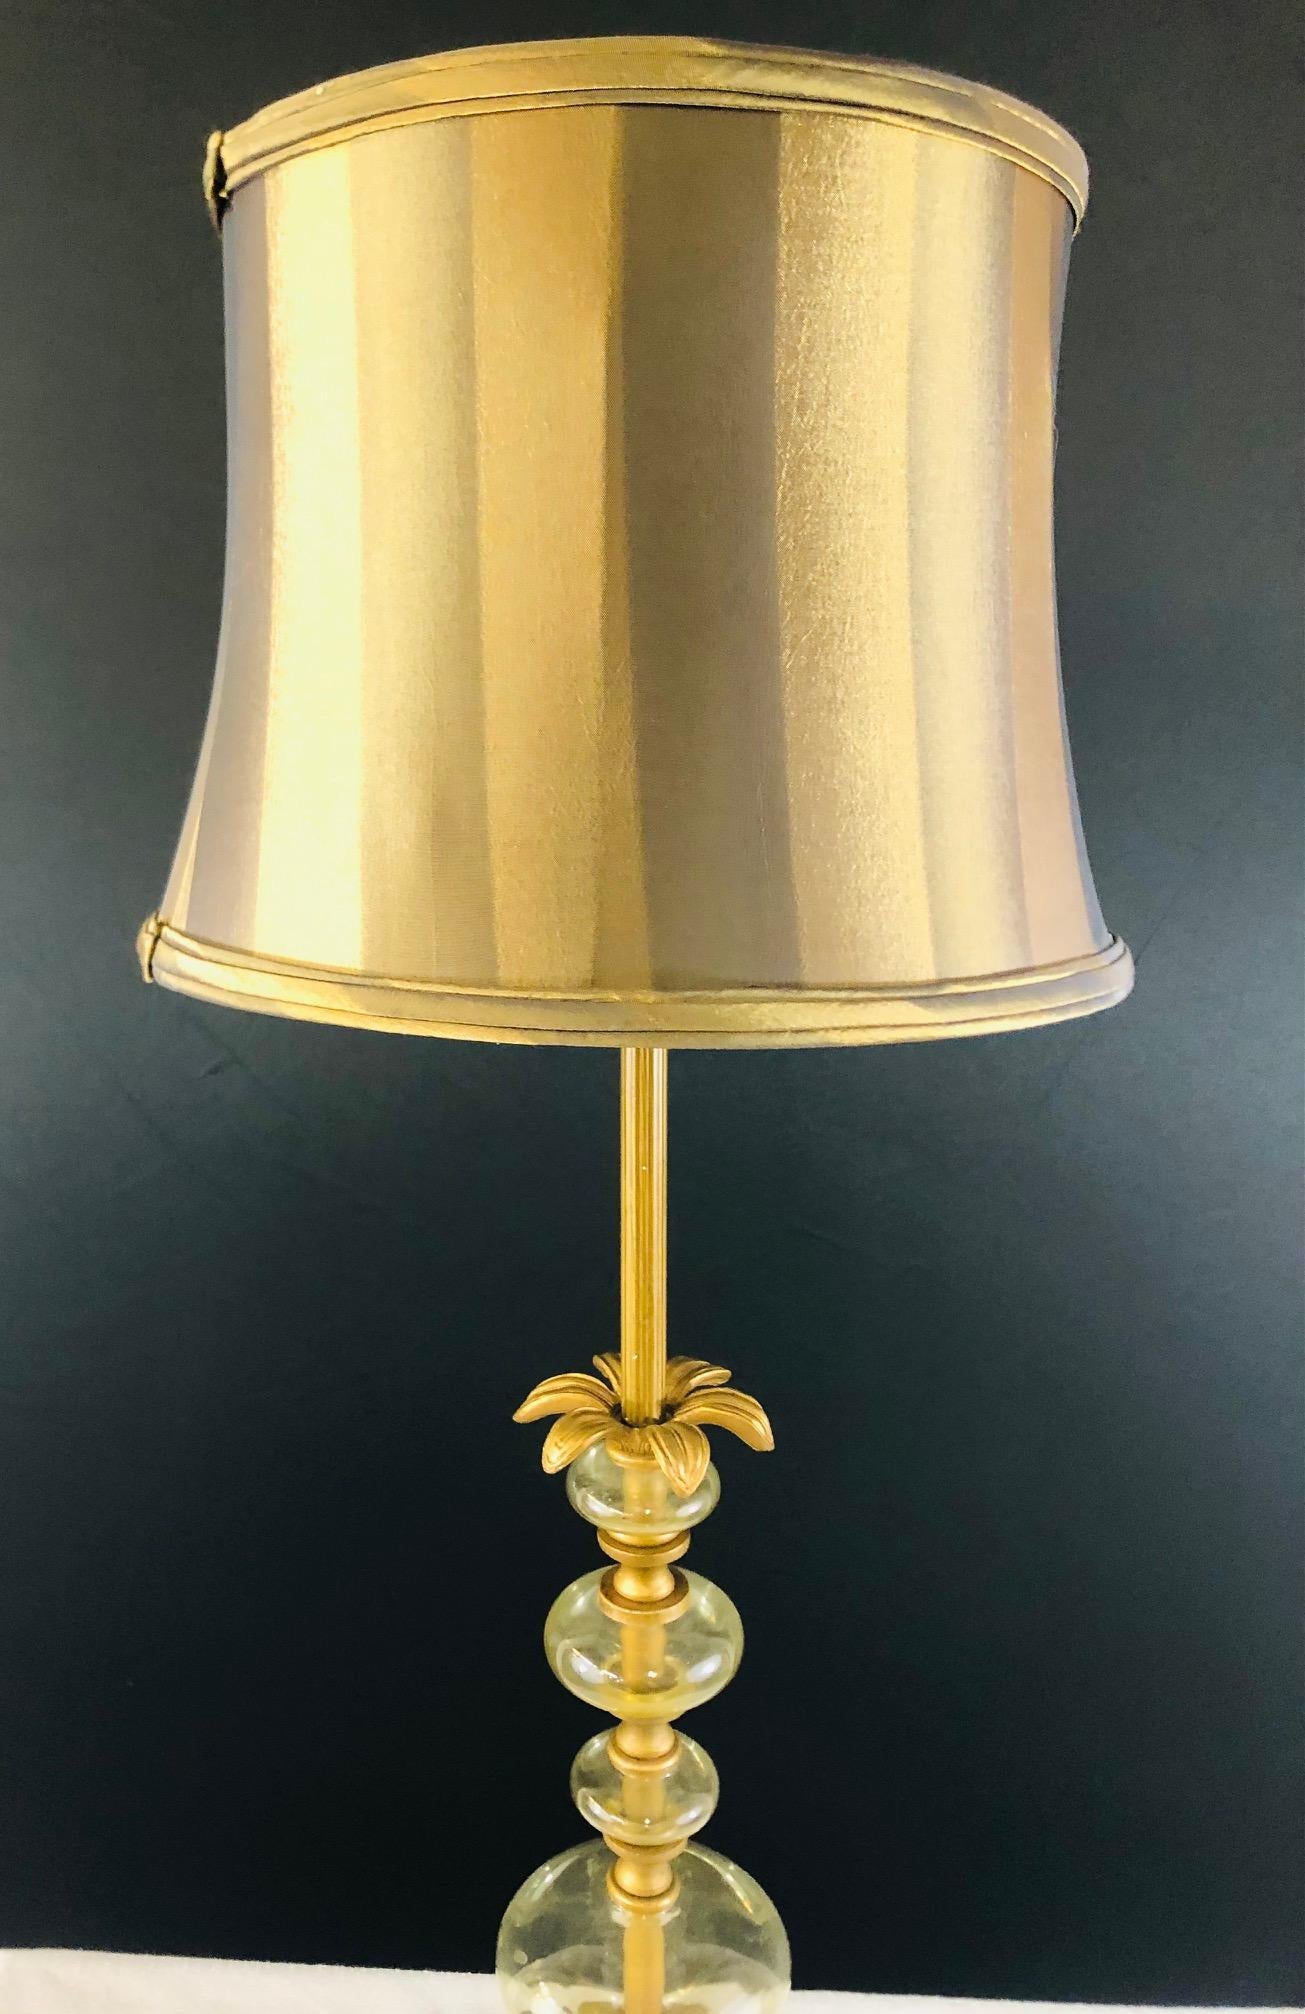 An elegant and stylish Mid-Century Modern table lamp in a brass palm tree style with glass design around the pipe and fine gold and brown color custom shade. This table lamp will light your room with style. 

Measures: Unit 30